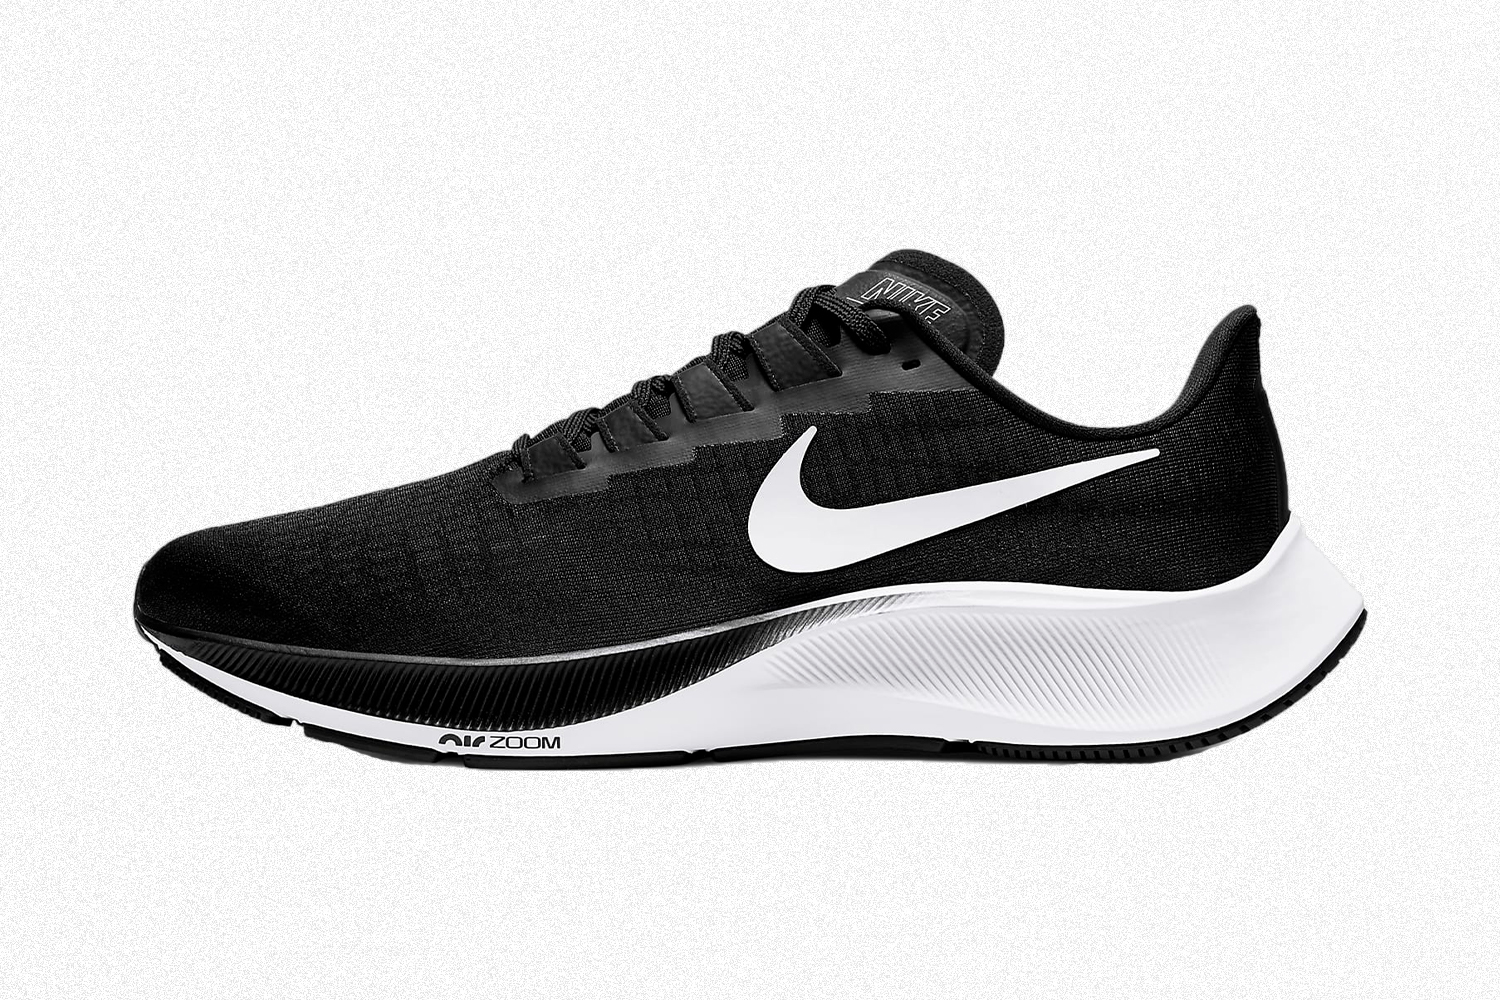 Nike Air Zoom Pegasus 37 running shoes in black and white